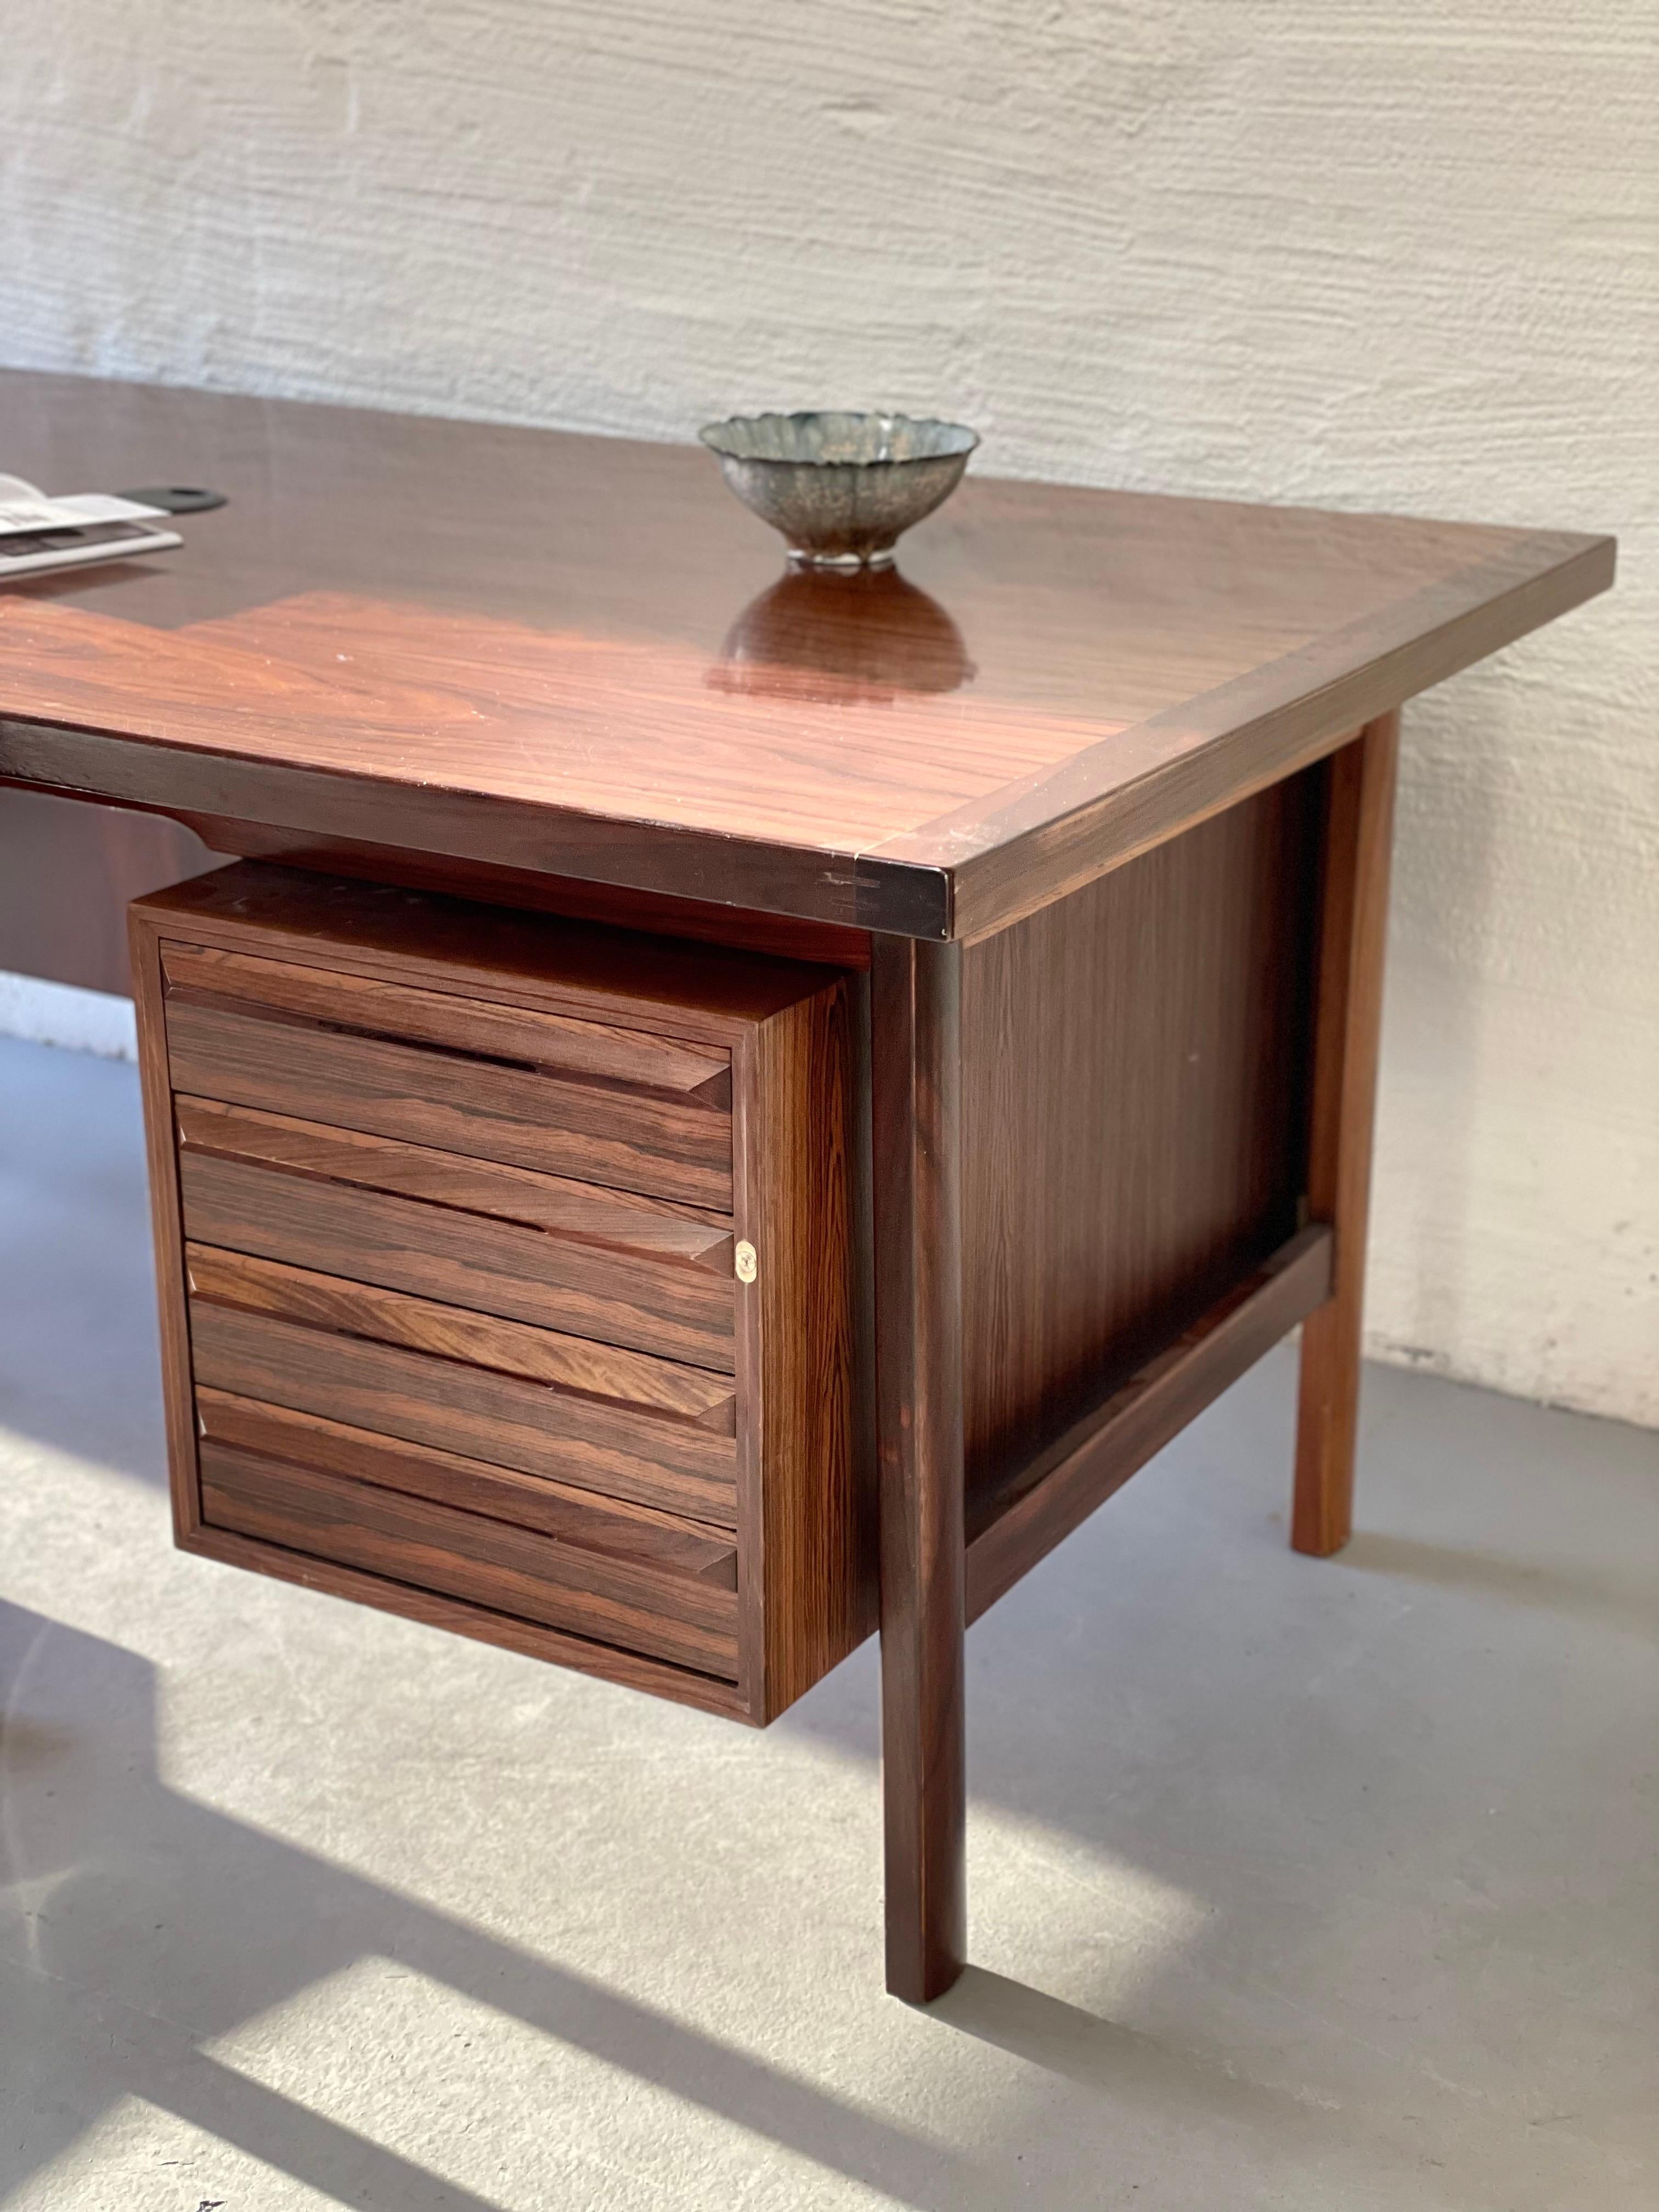 Selling a wonderful desk in rosewood designed by Torbjørn Afdal for Bruksbo Tegnekontor, produced by Haug Snekkeri,

Drawer section with four drawers, the key is missing but all drawers are open and open and clous nicely.
Practical entry for PC